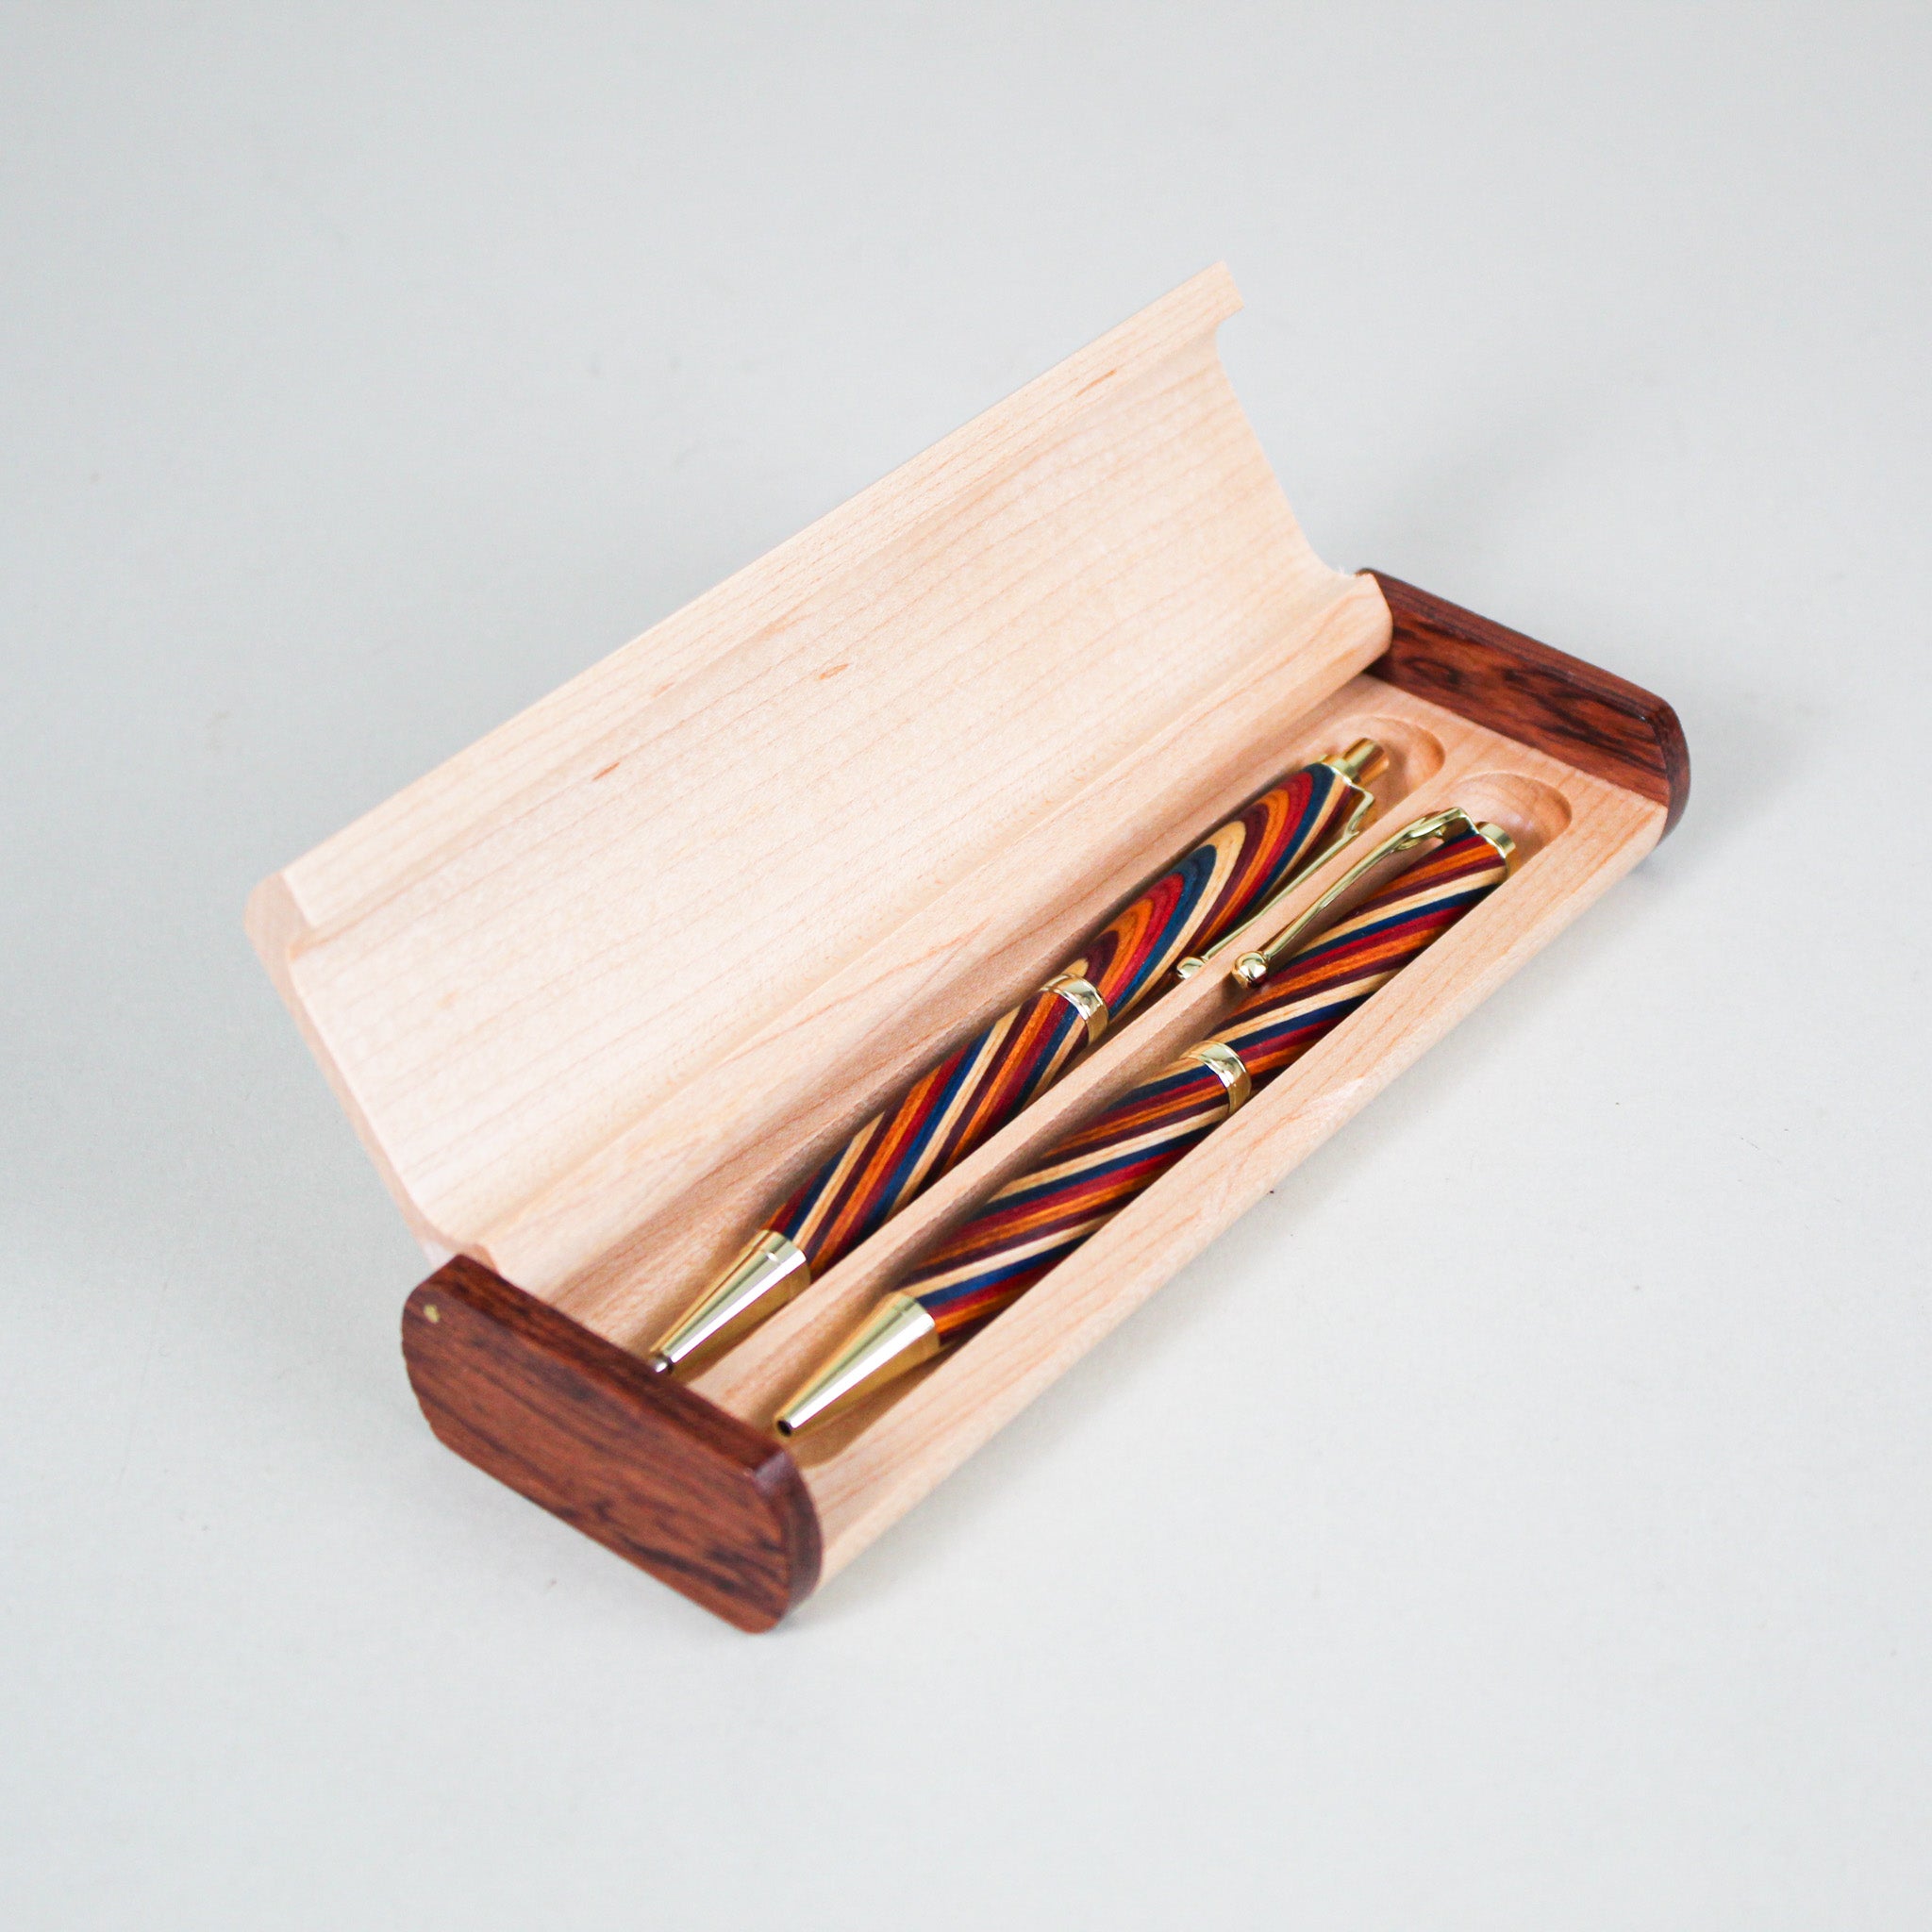 Flat Pen Box with Wood Pen & Pencil Set – Museum for Art in Wood